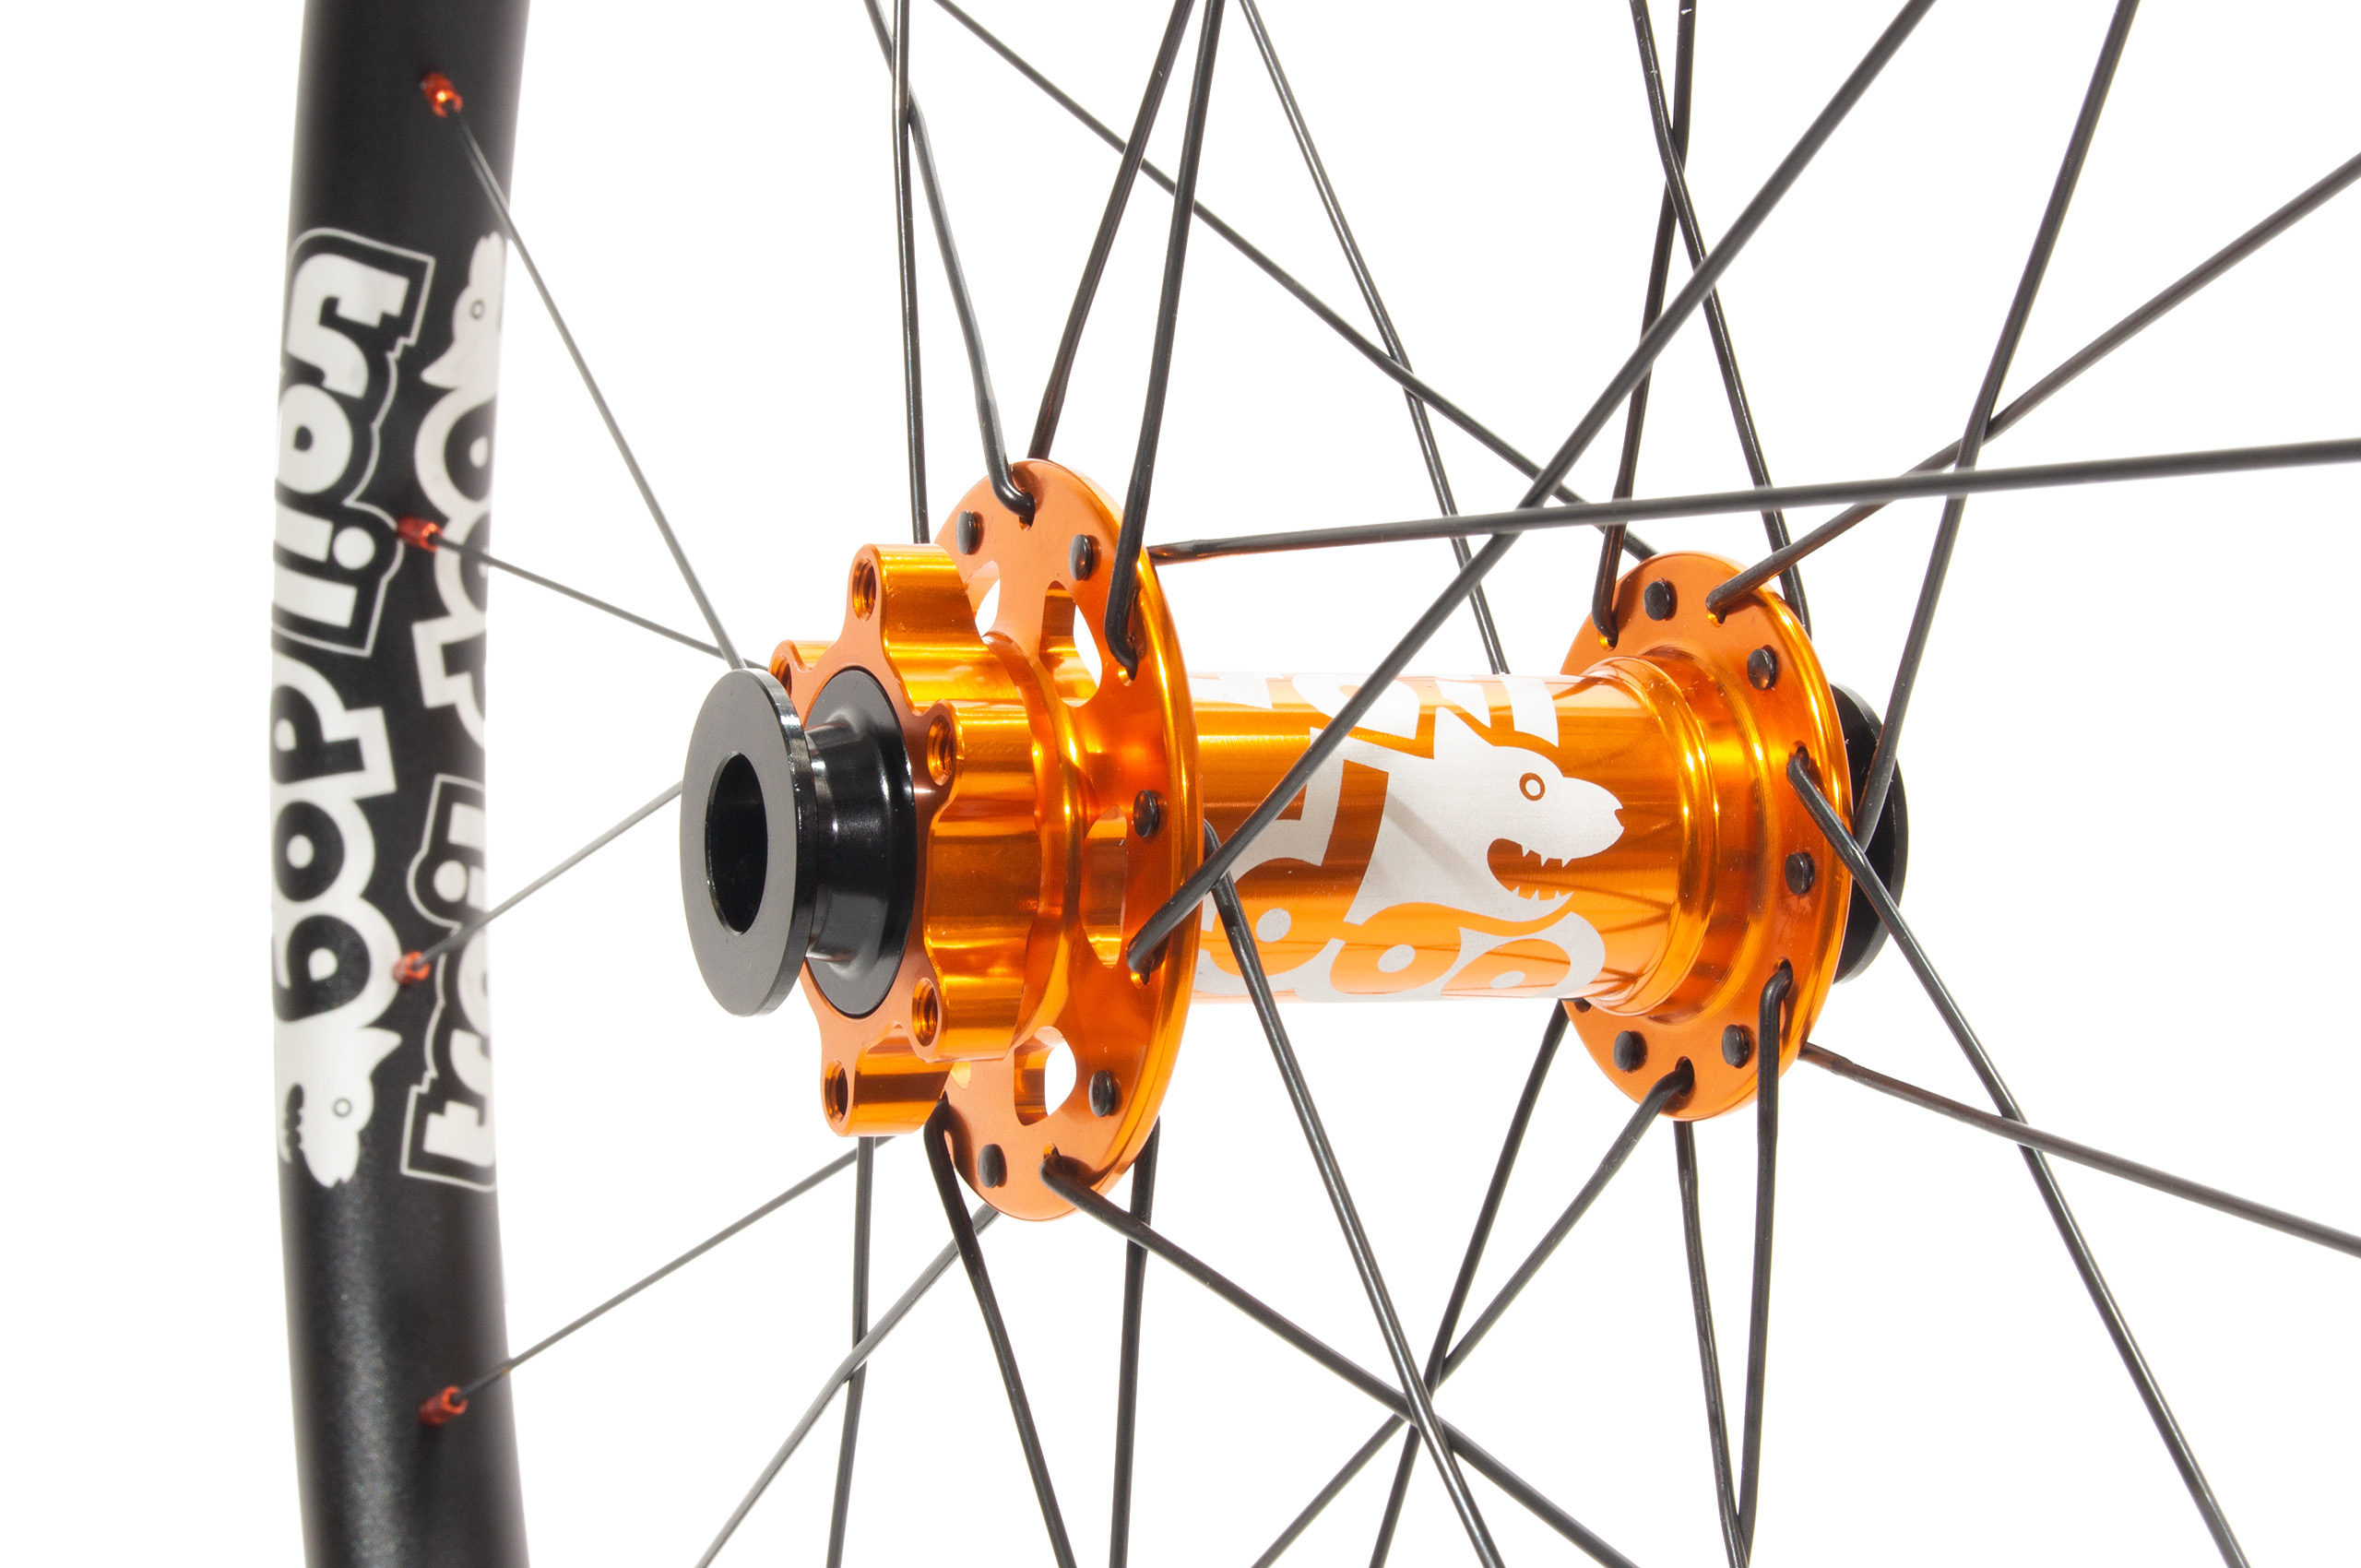 Traildog wheelset with orange boost J-bend hub fitted with torque end-caps